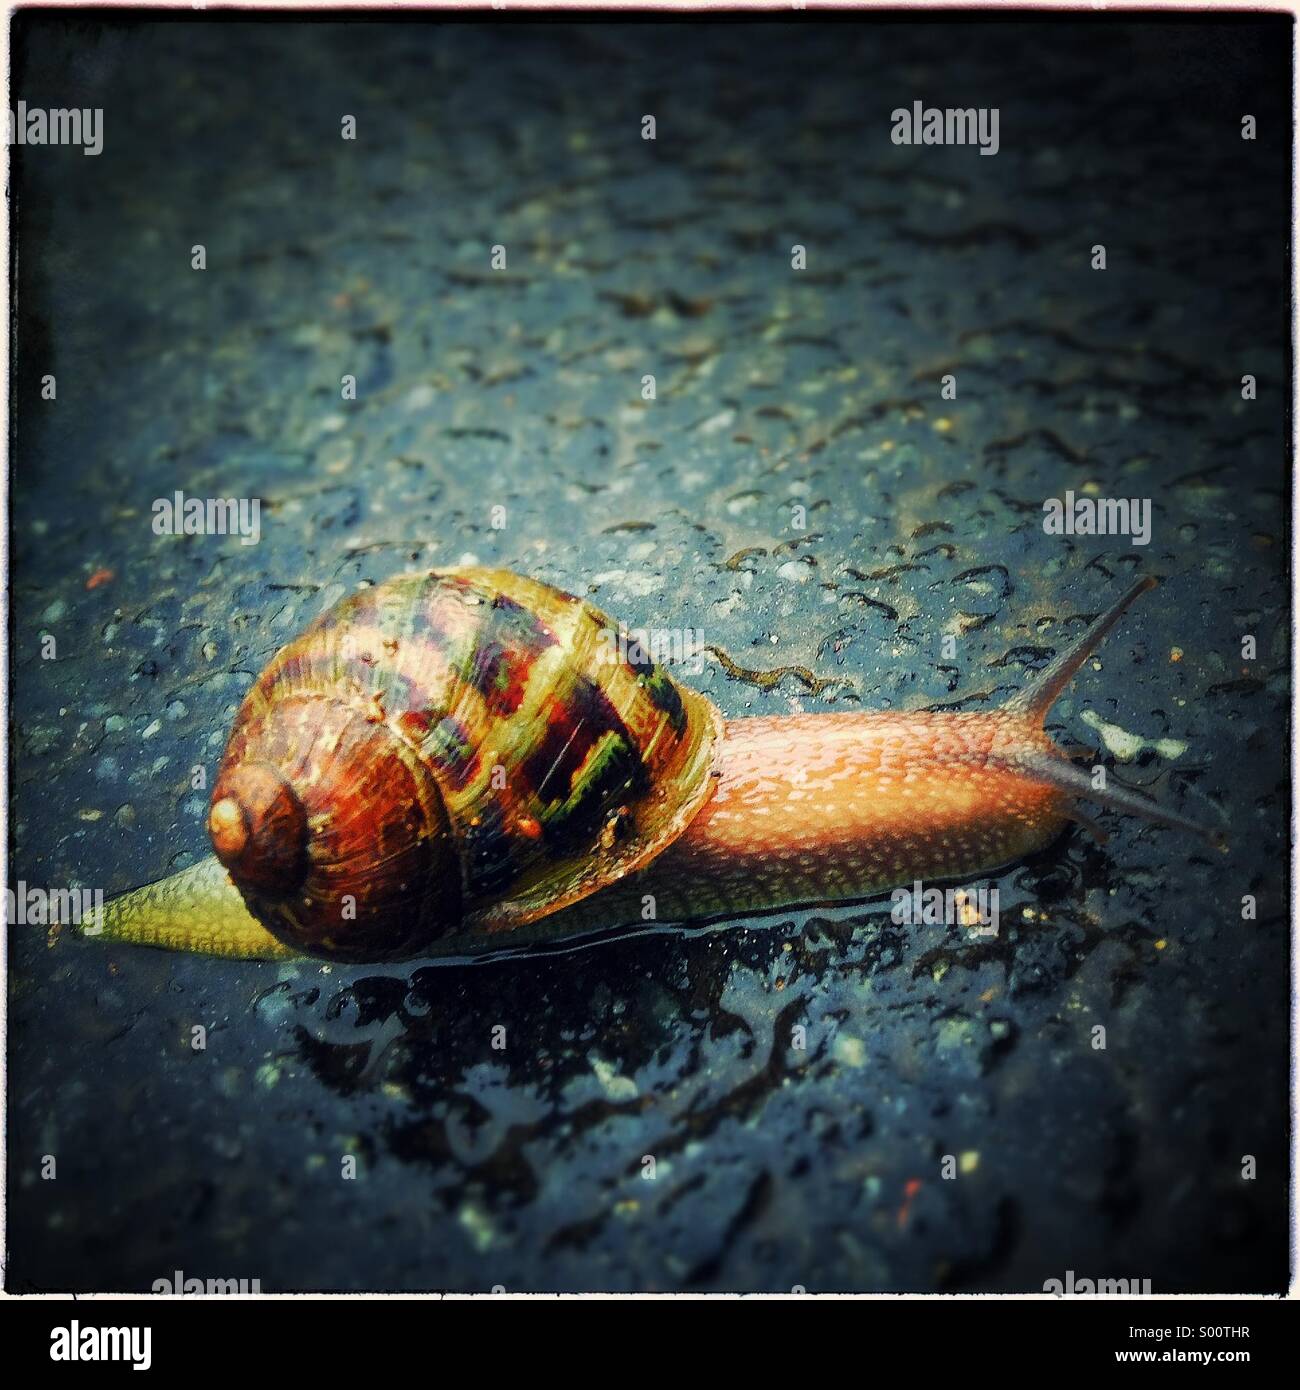 Snail on the road Stock Photo